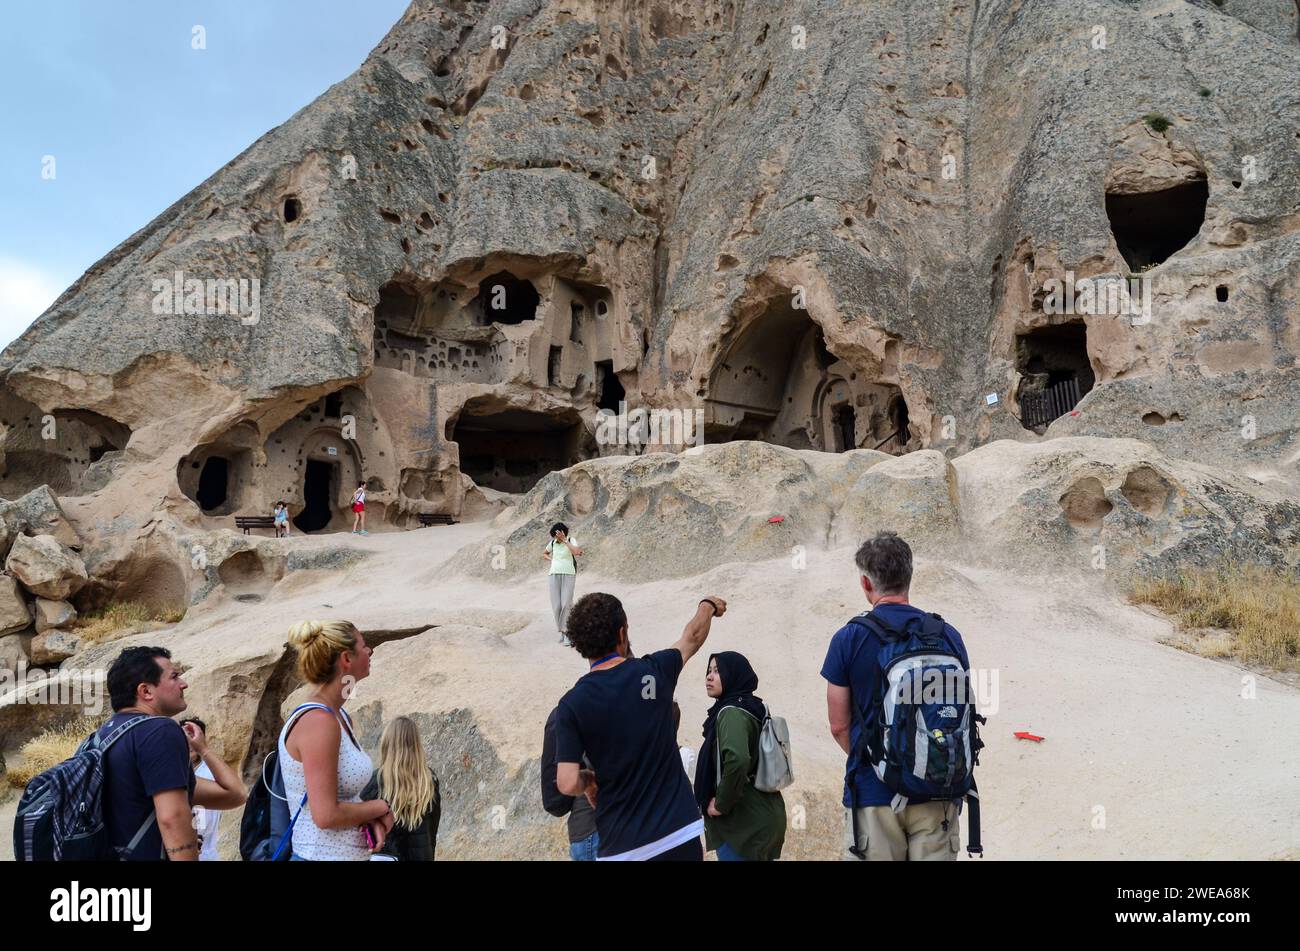 Tourists visiting the ancient cave dwellings in a rocky landscape, in Cappadocia, Turkey, with a guide pointing out details. Stock Photo